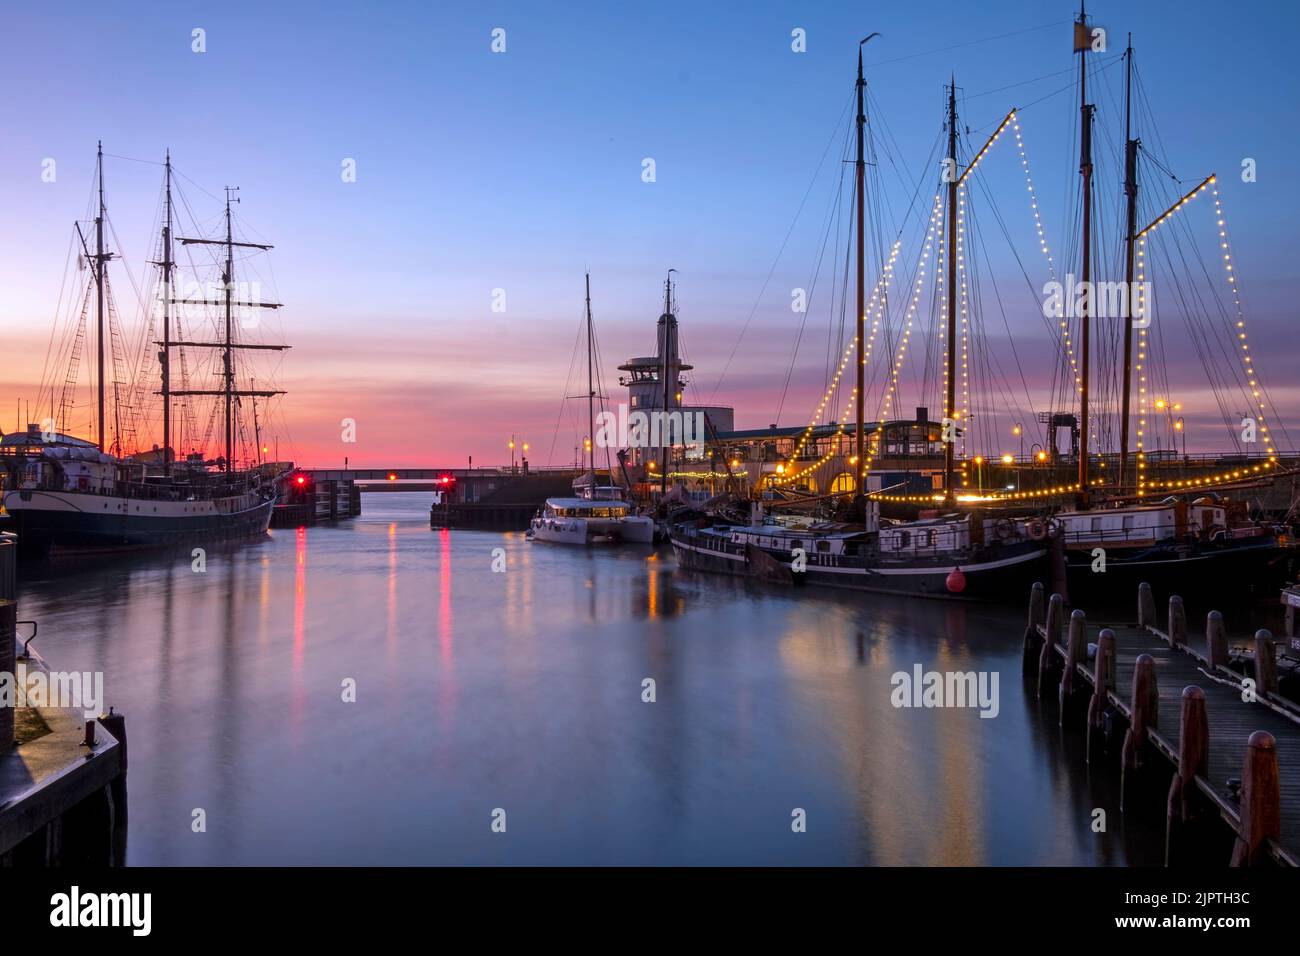 Harbor from Harlingen with decorated sailing boats in Friesland the Netherlands at sunset Stock Photo